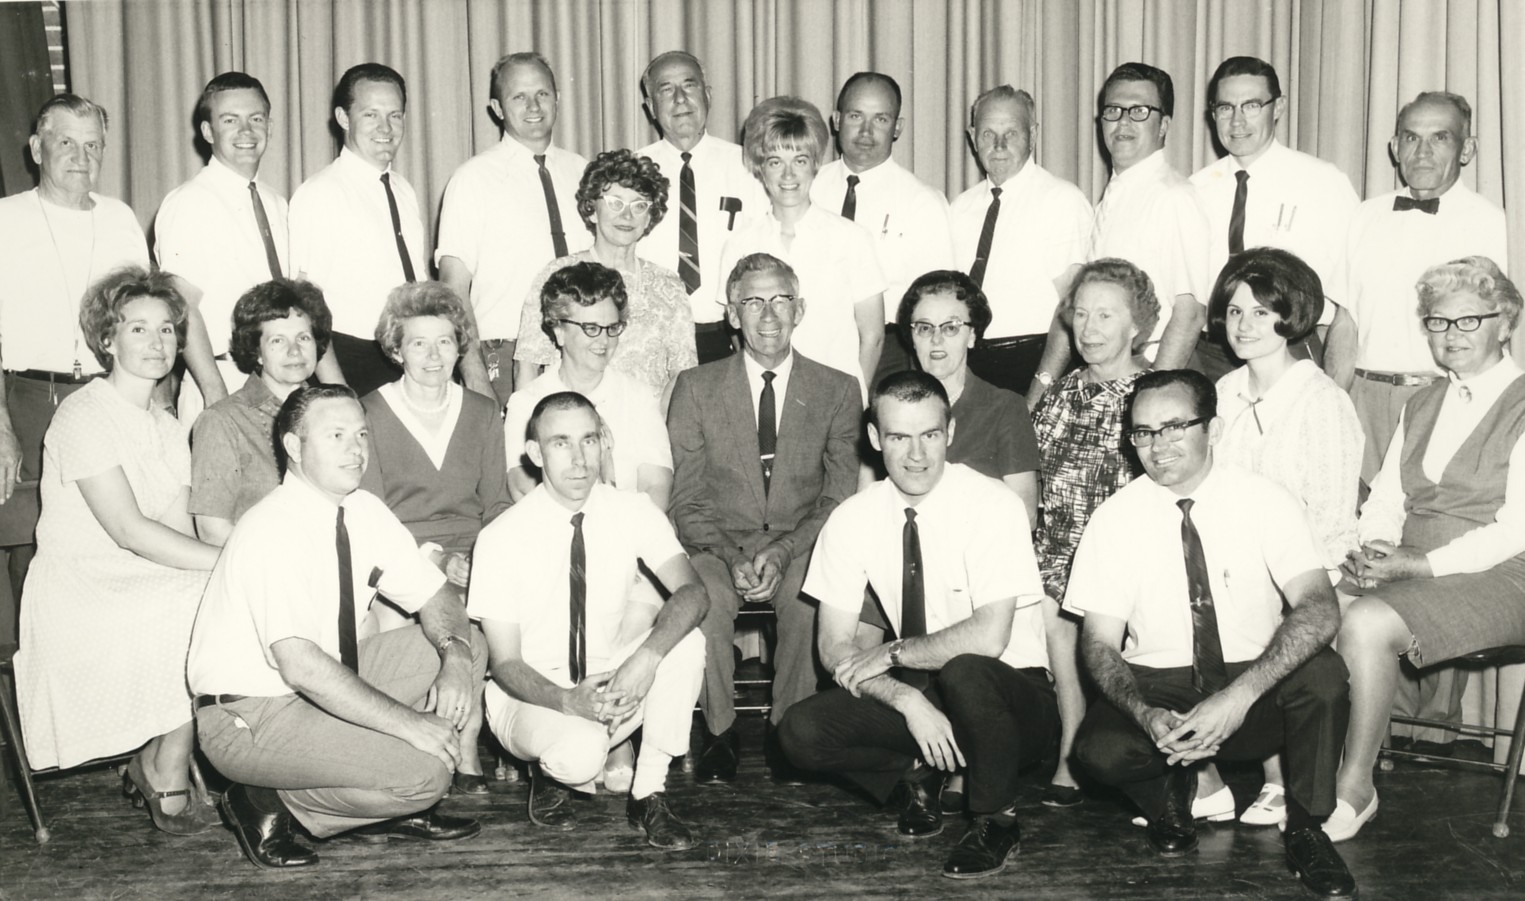 1969 faculty at the Woodward School in St. George